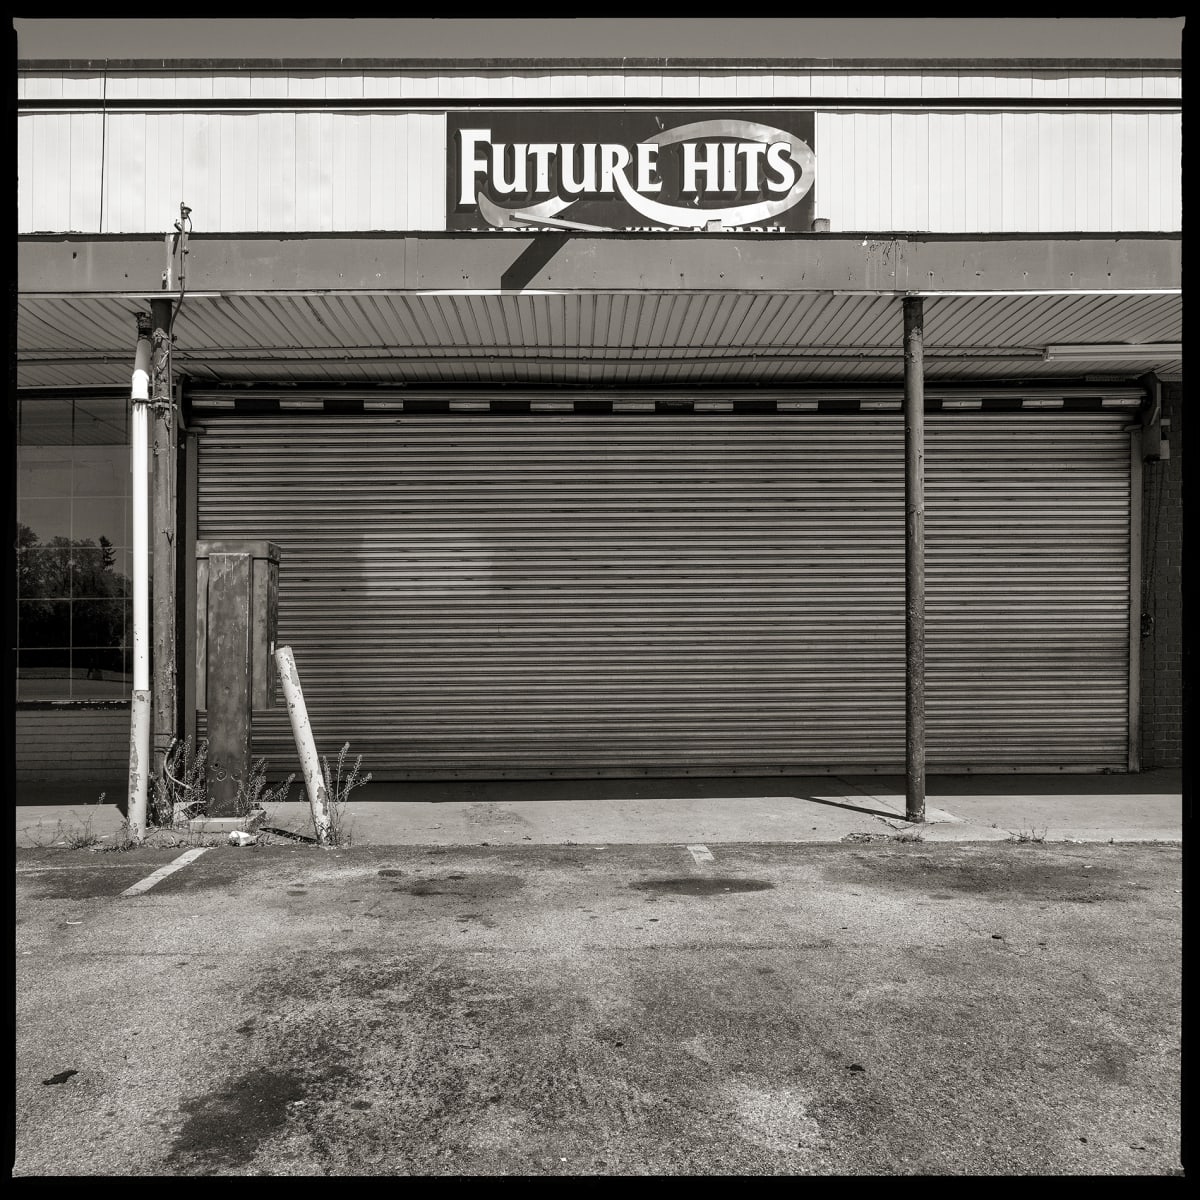 585.288.9600 – 836 North Goodman Street, Rochester, NY 14609 by Eric T. Kunsman  Image: ID: A black and white image shows a closed building.  The awning has a "Future Hits" sign.  There is a payphone booth standing next to a pole in front of the building.